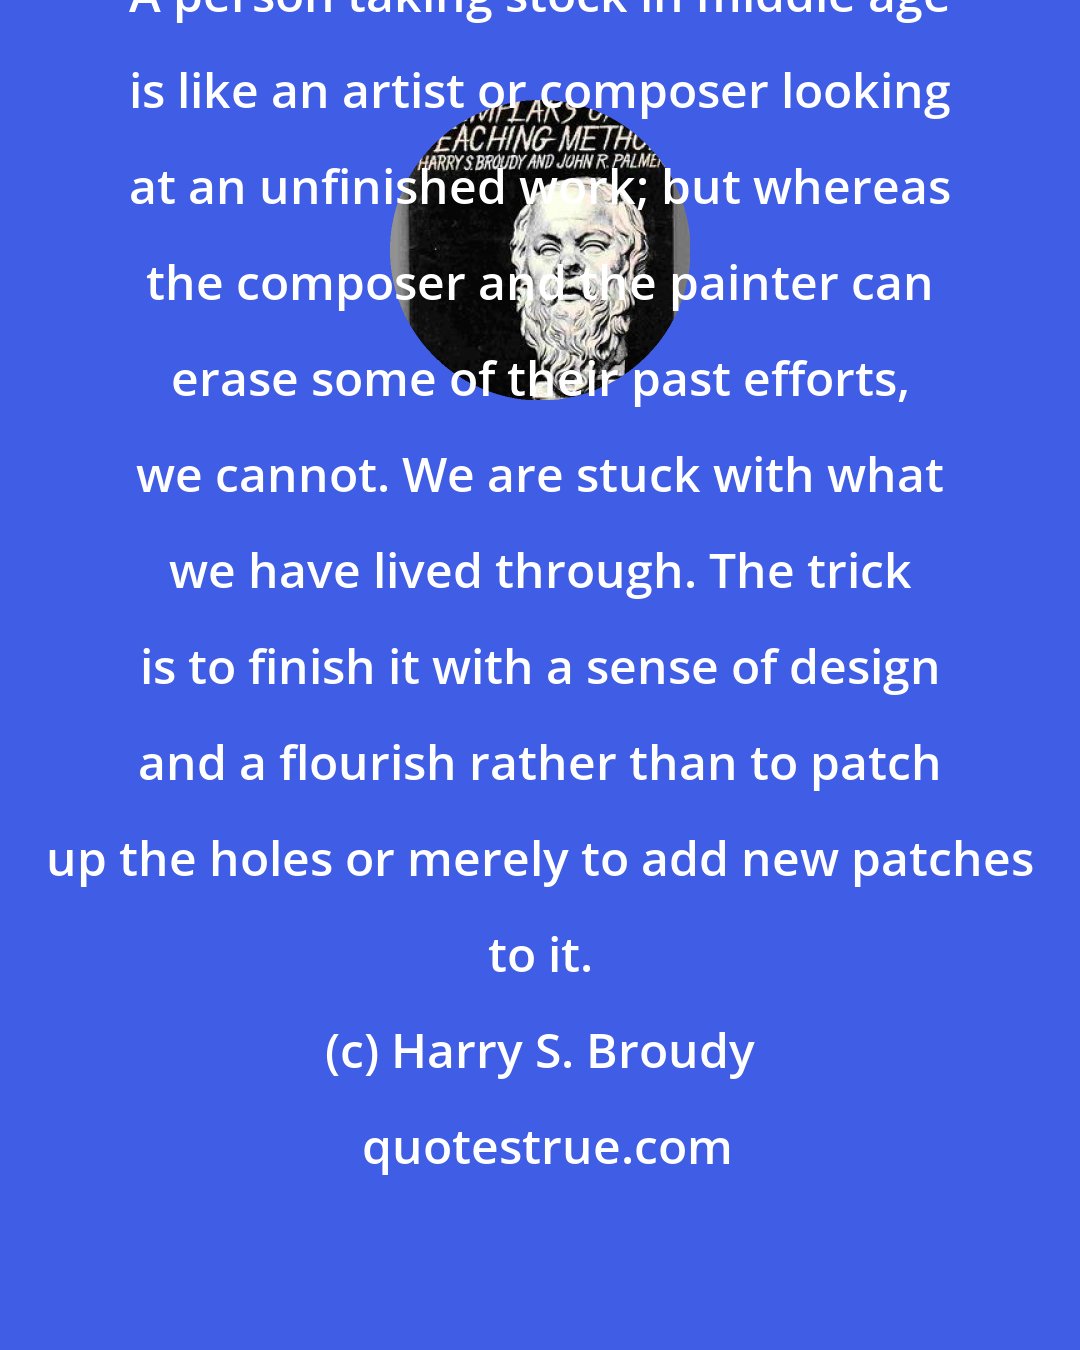 Harry S. Broudy: A person taking stock in middle age is like an artist or composer looking at an unfinished work; but whereas the composer and the painter can erase some of their past efforts, we cannot. We are stuck with what we have lived through. The trick is to finish it with a sense of design and a flourish rather than to patch up the holes or merely to add new patches to it.